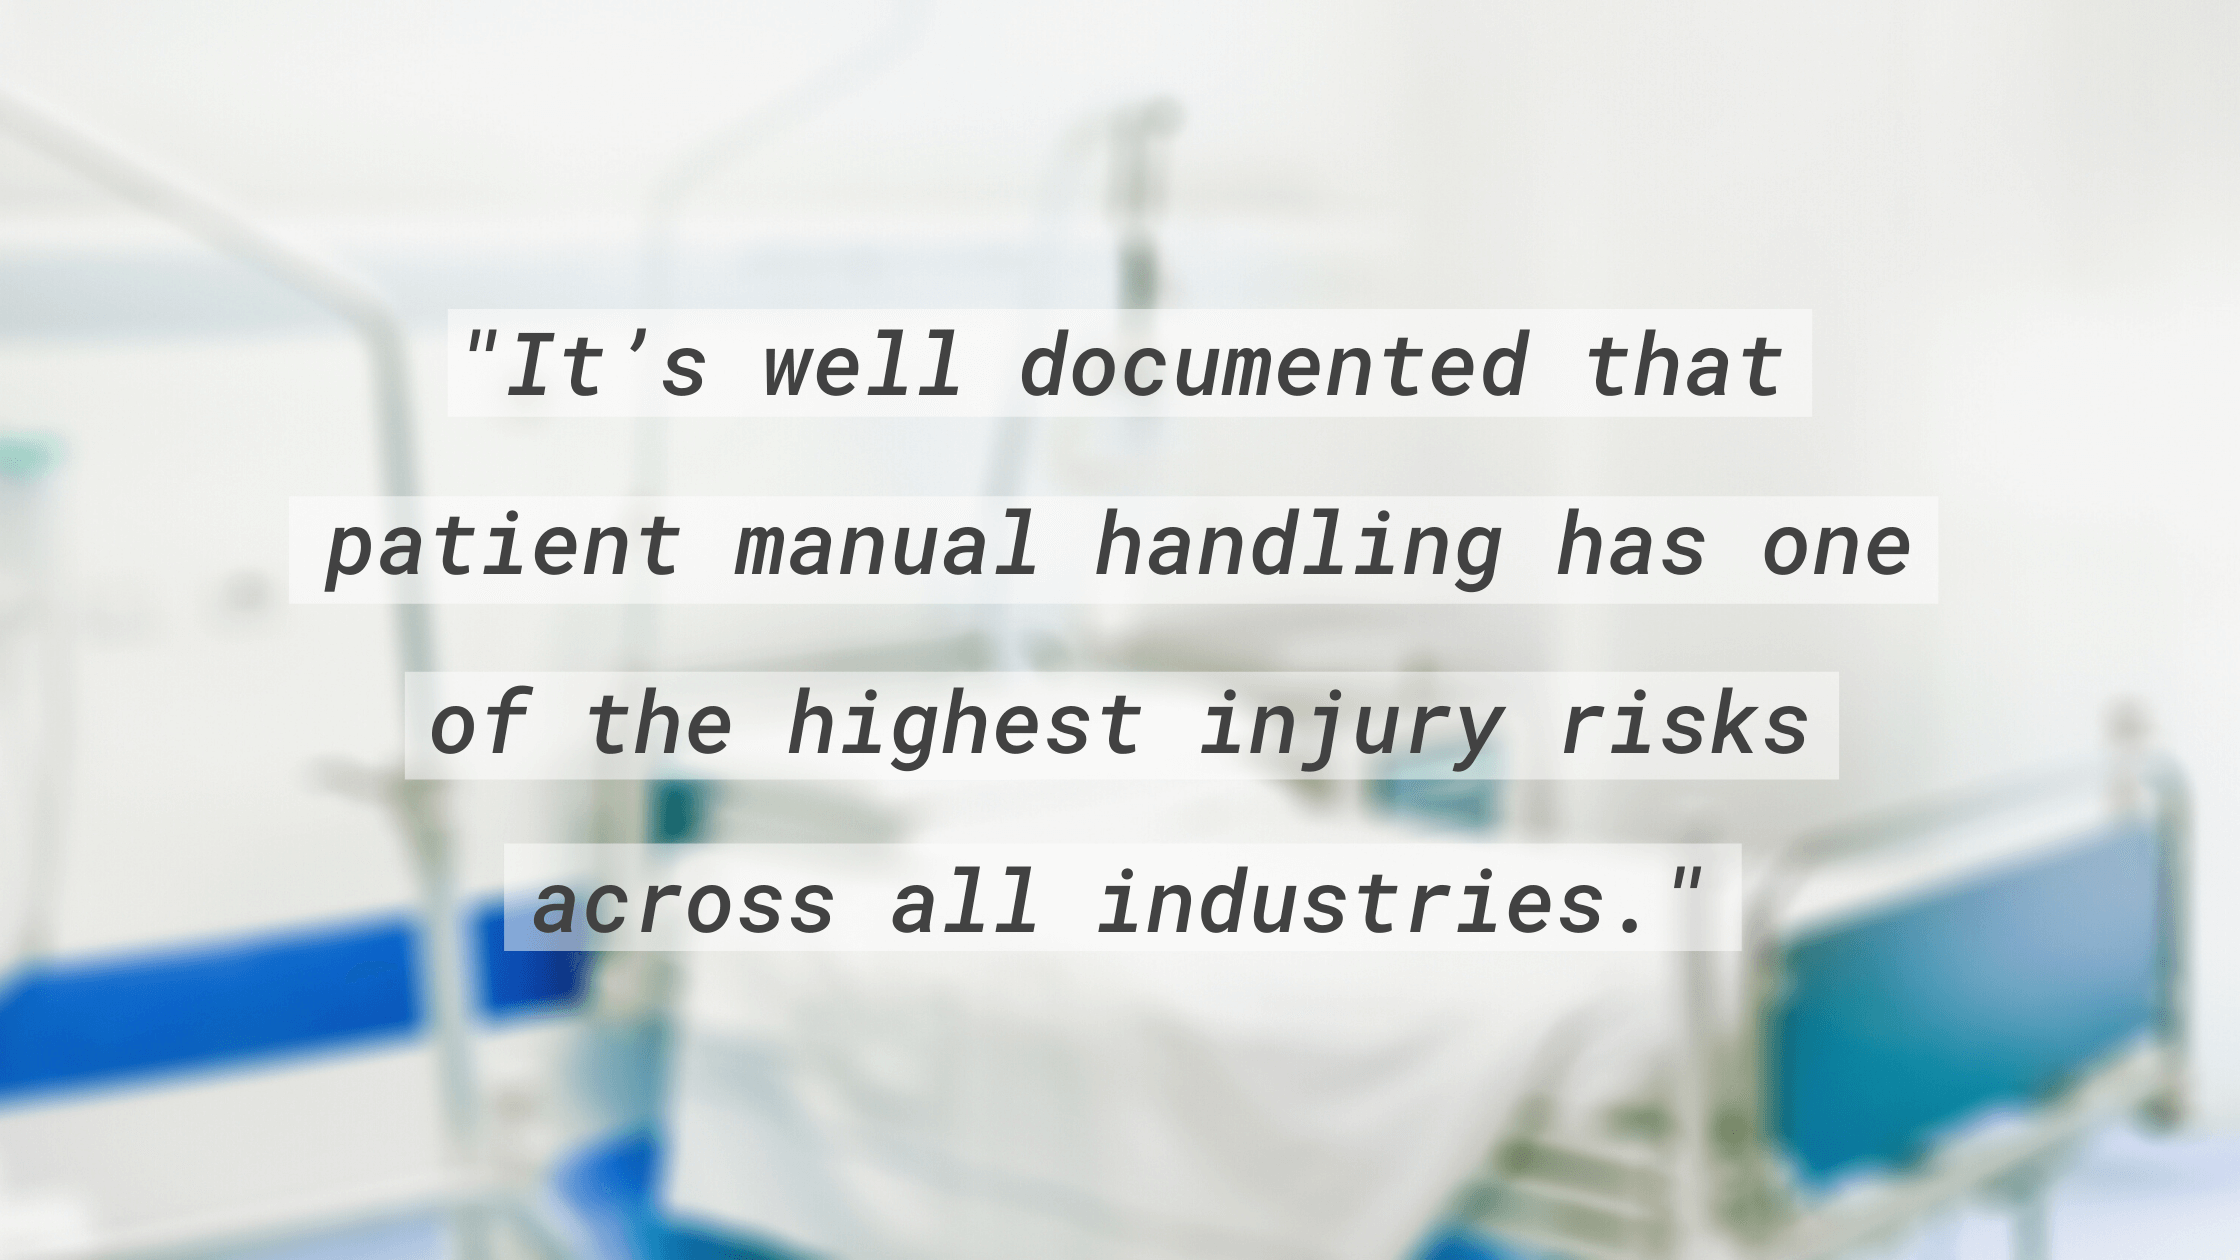 "It's well documented that patient manual handling has one of the highest injury risks across all industries."